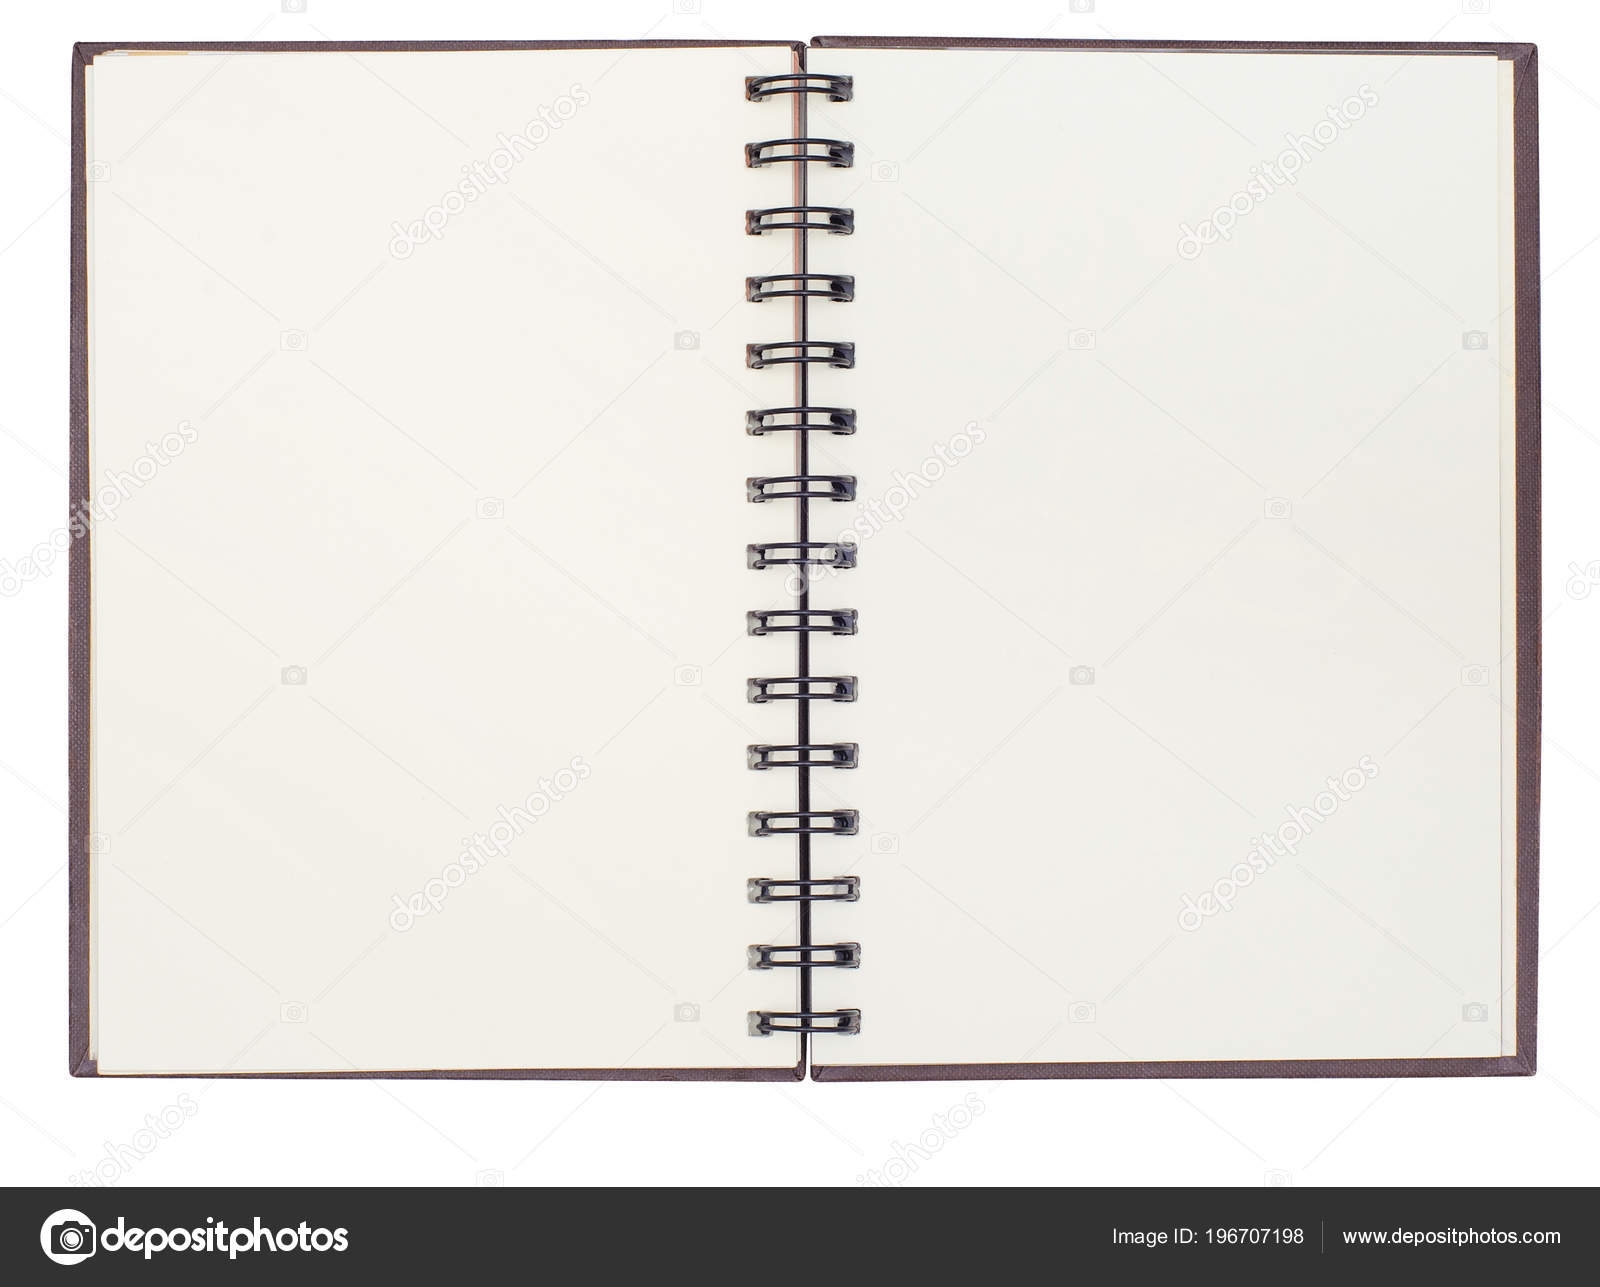 Notepad Isolated: Over 180,184 Royalty-Free Licensable Stock Photos